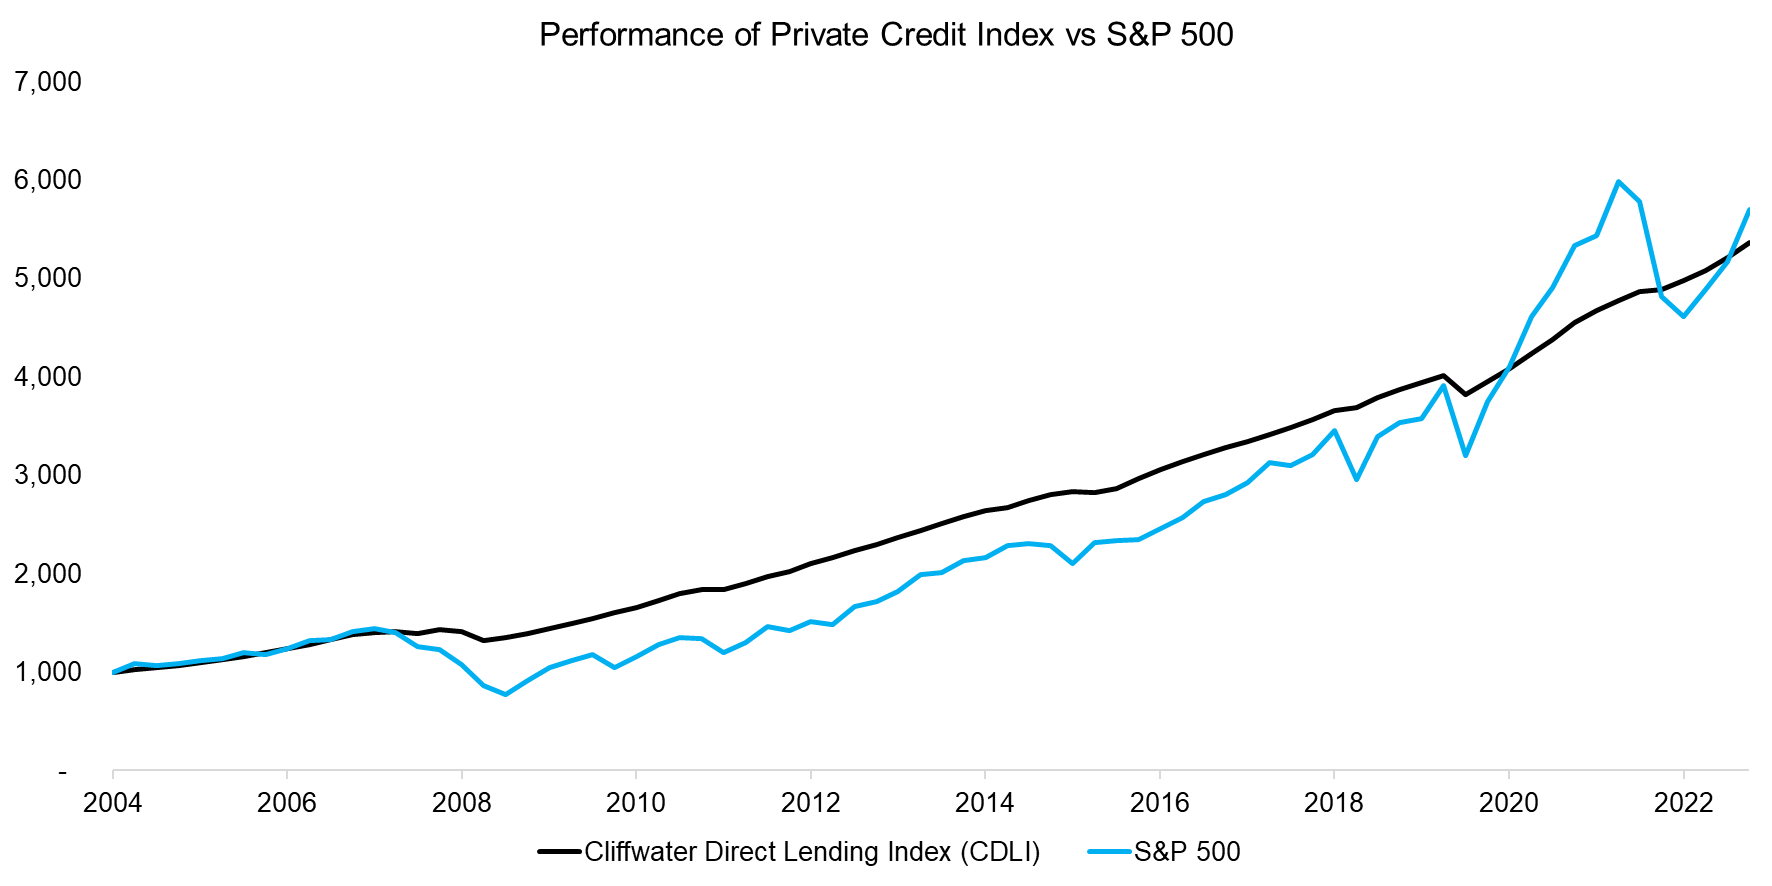 Performance of Private Credit Index vs S&P 500